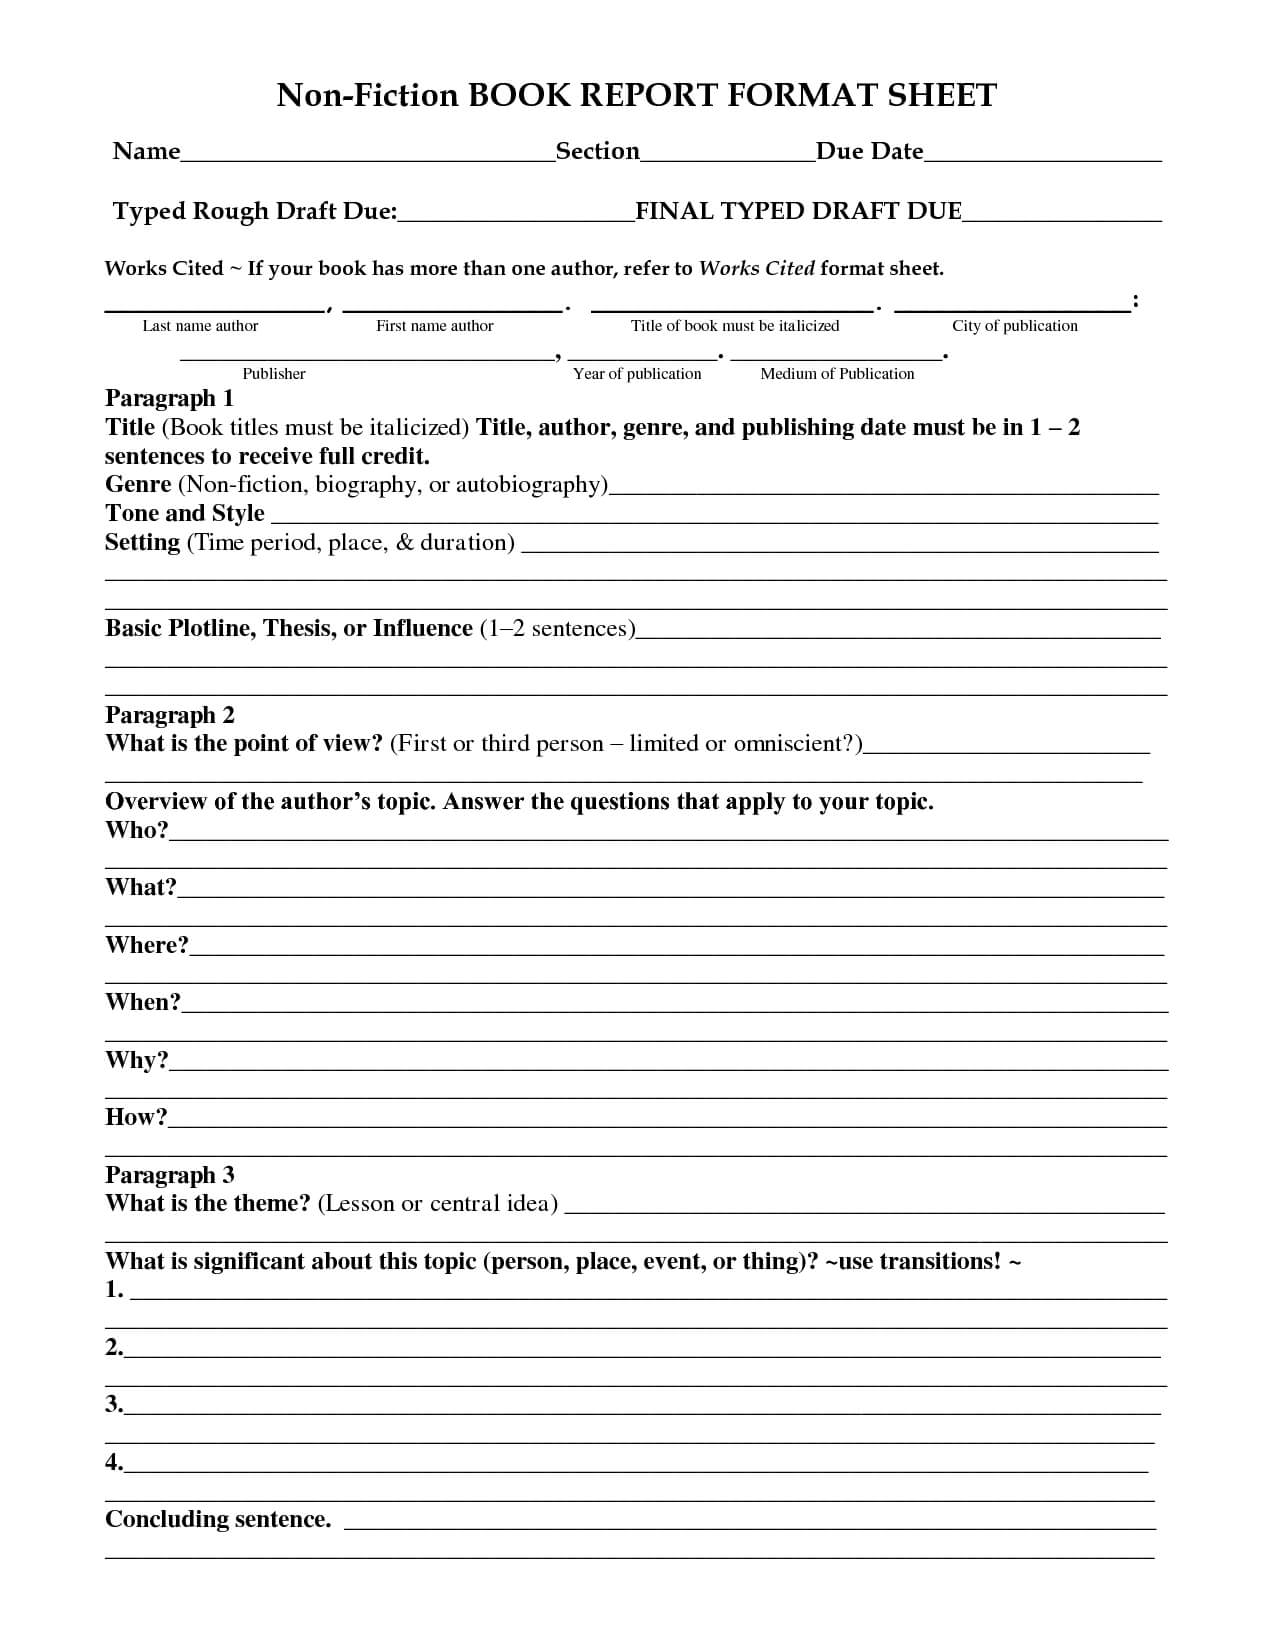 28 Images Of 5Th Grade Non Fiction Book Report Template With Nonfiction Book Report Template